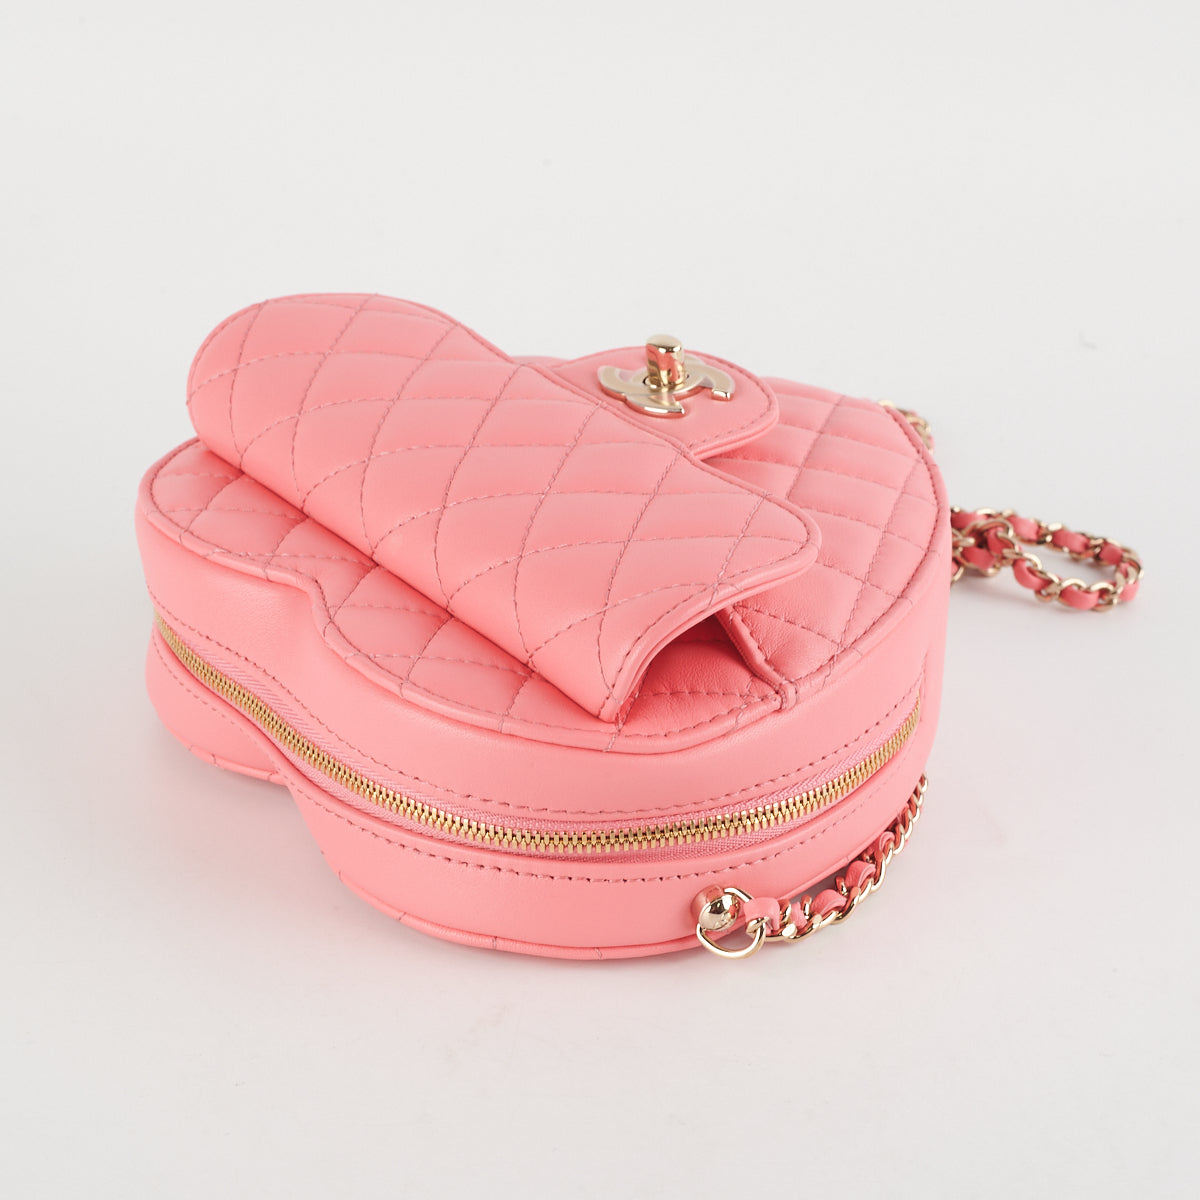 Chanel Heart Bag Pink (Large) – The Luxury Shopper